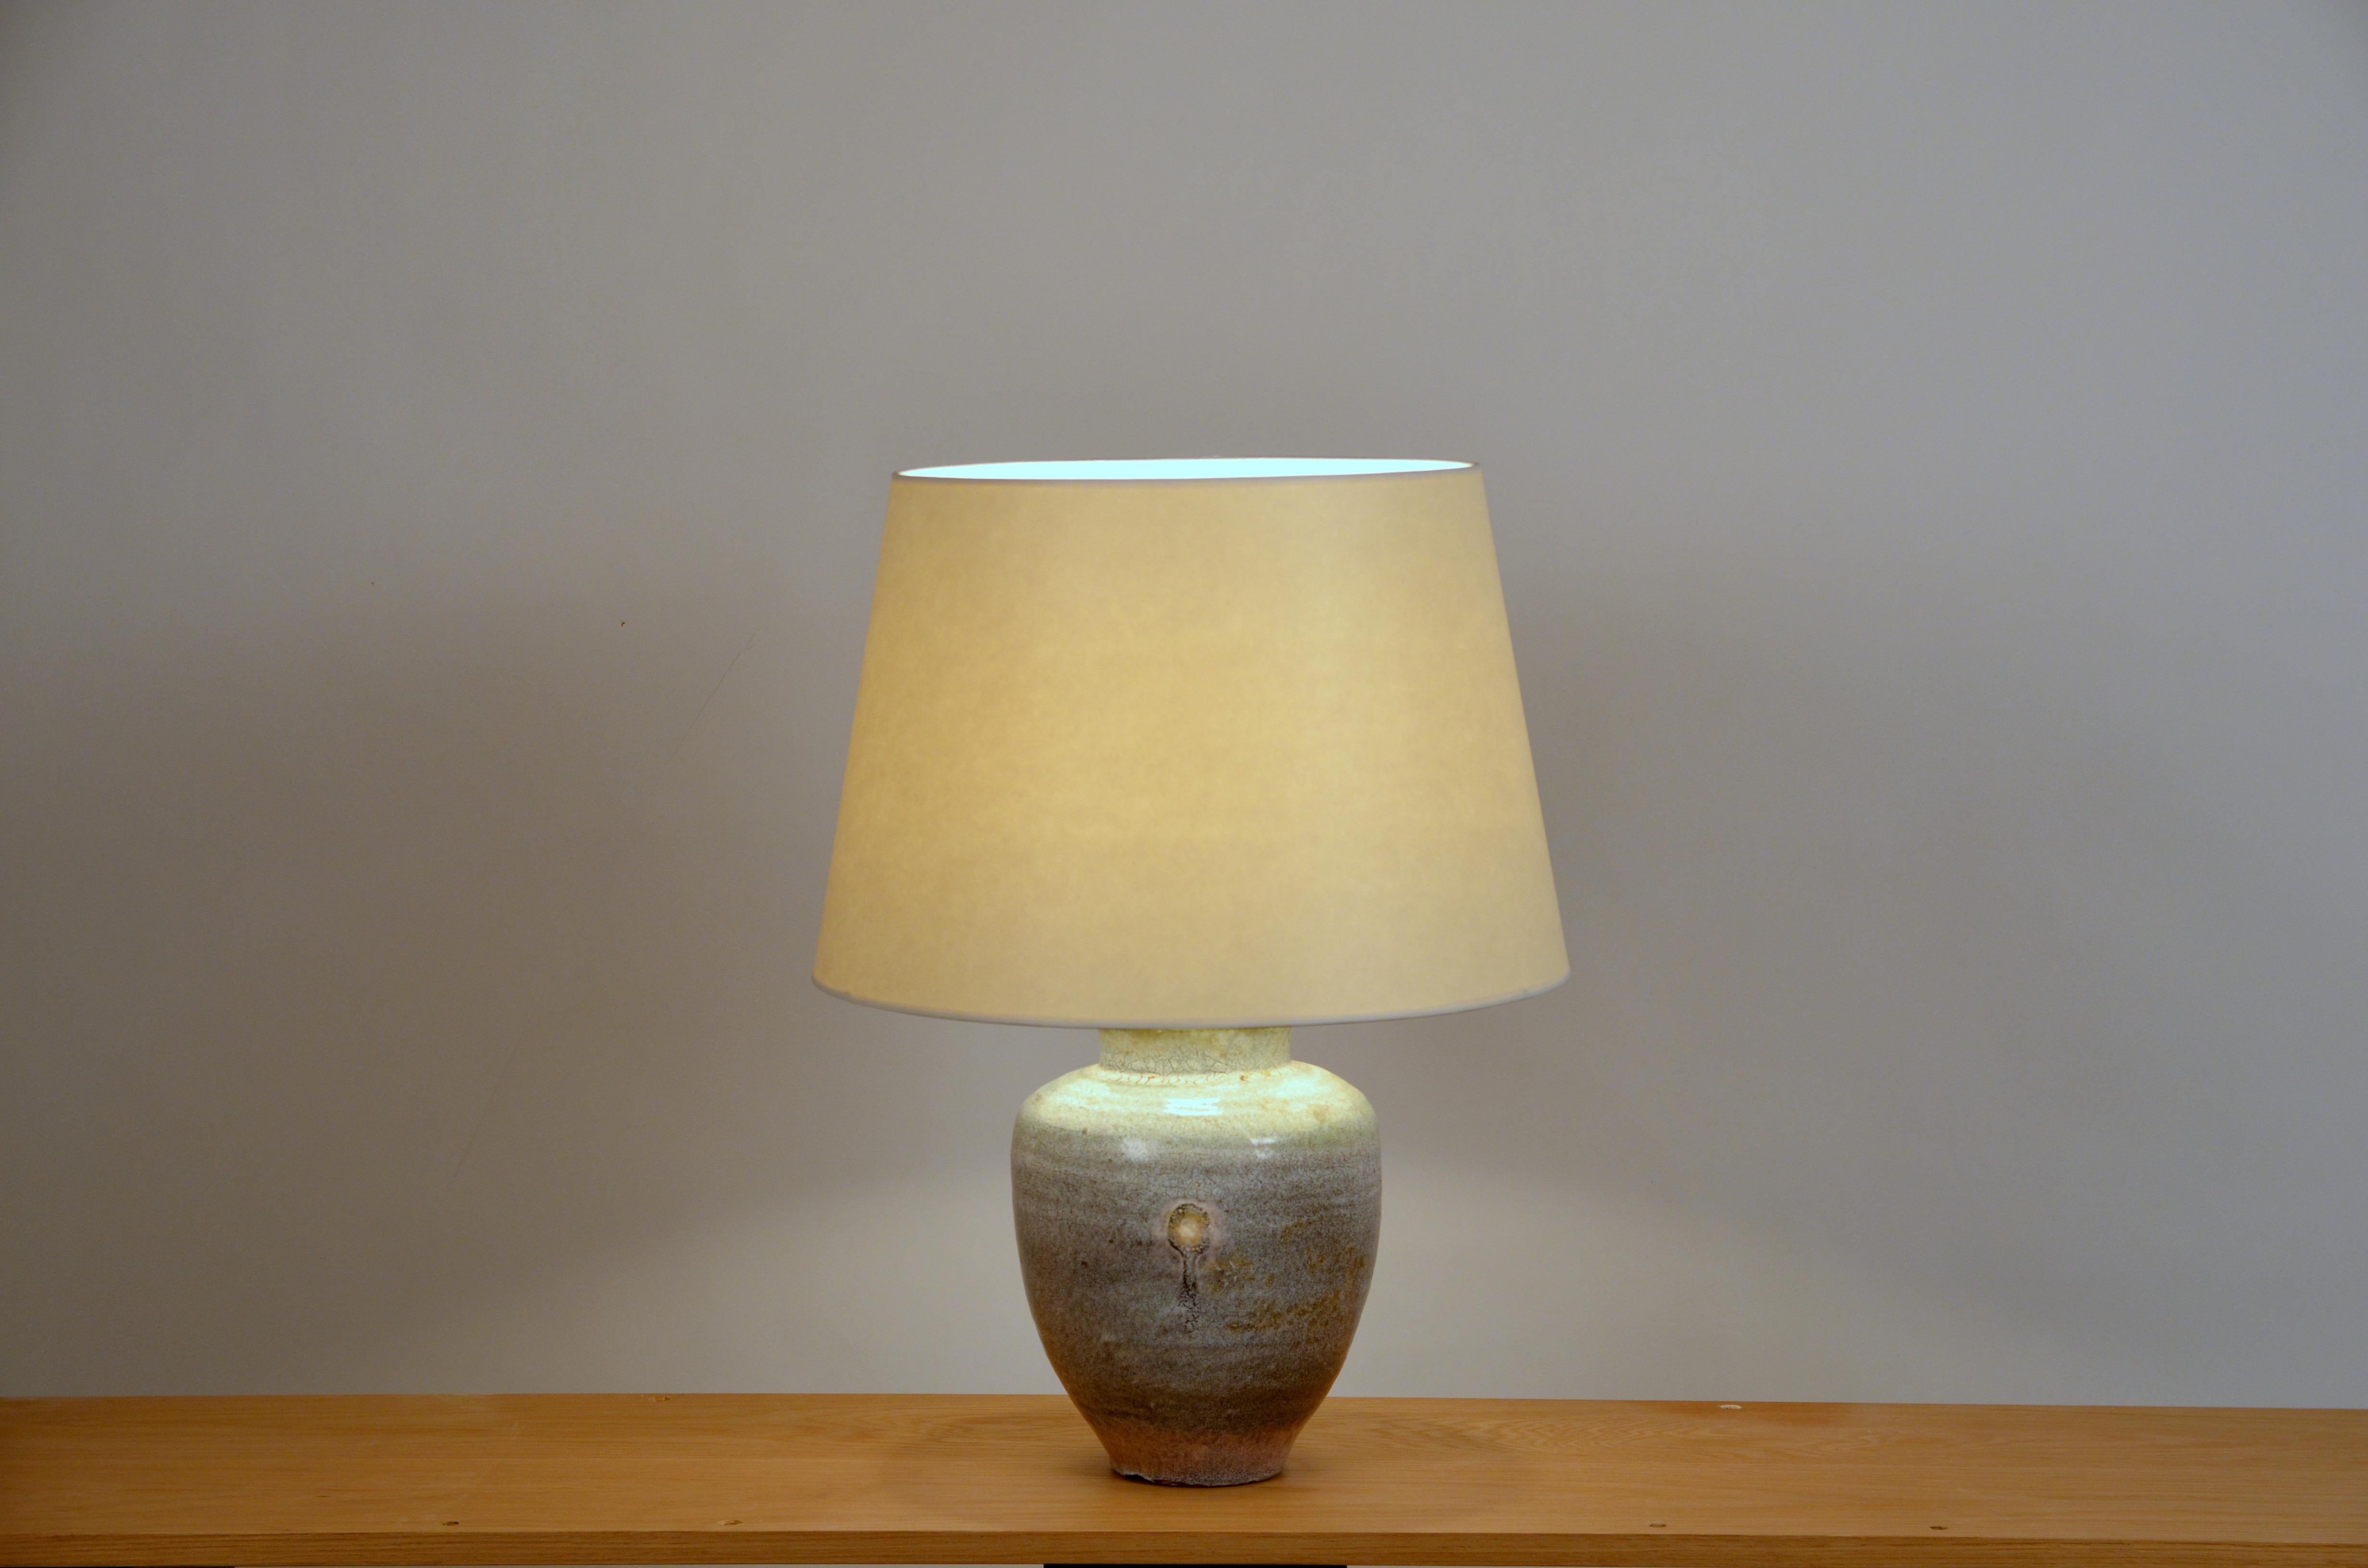 Organic Modern Chic Glazed Ceramic Table Lamp by Accolay Pottery, France